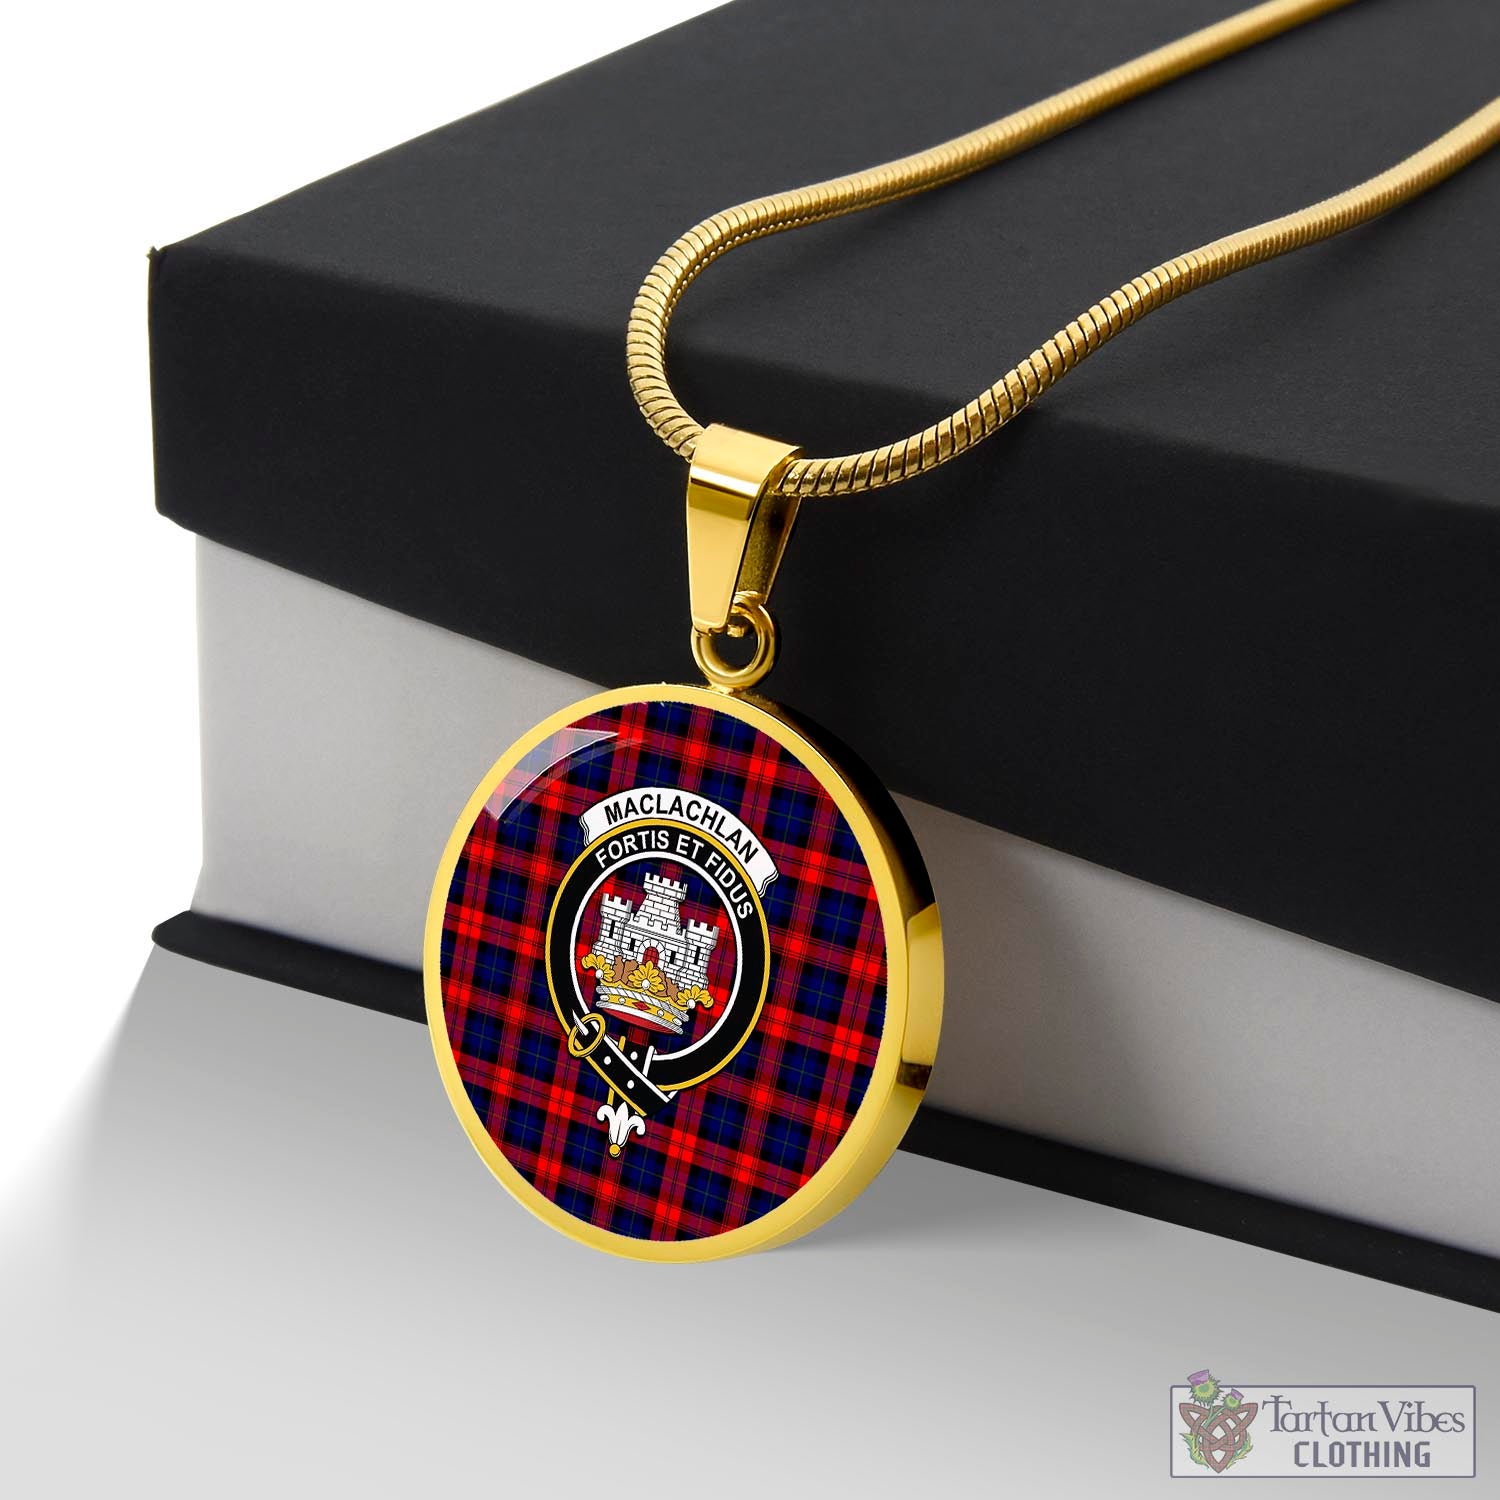 Tartan Vibes Clothing MacLachlan Modern Tartan Circle Necklace with Family Crest